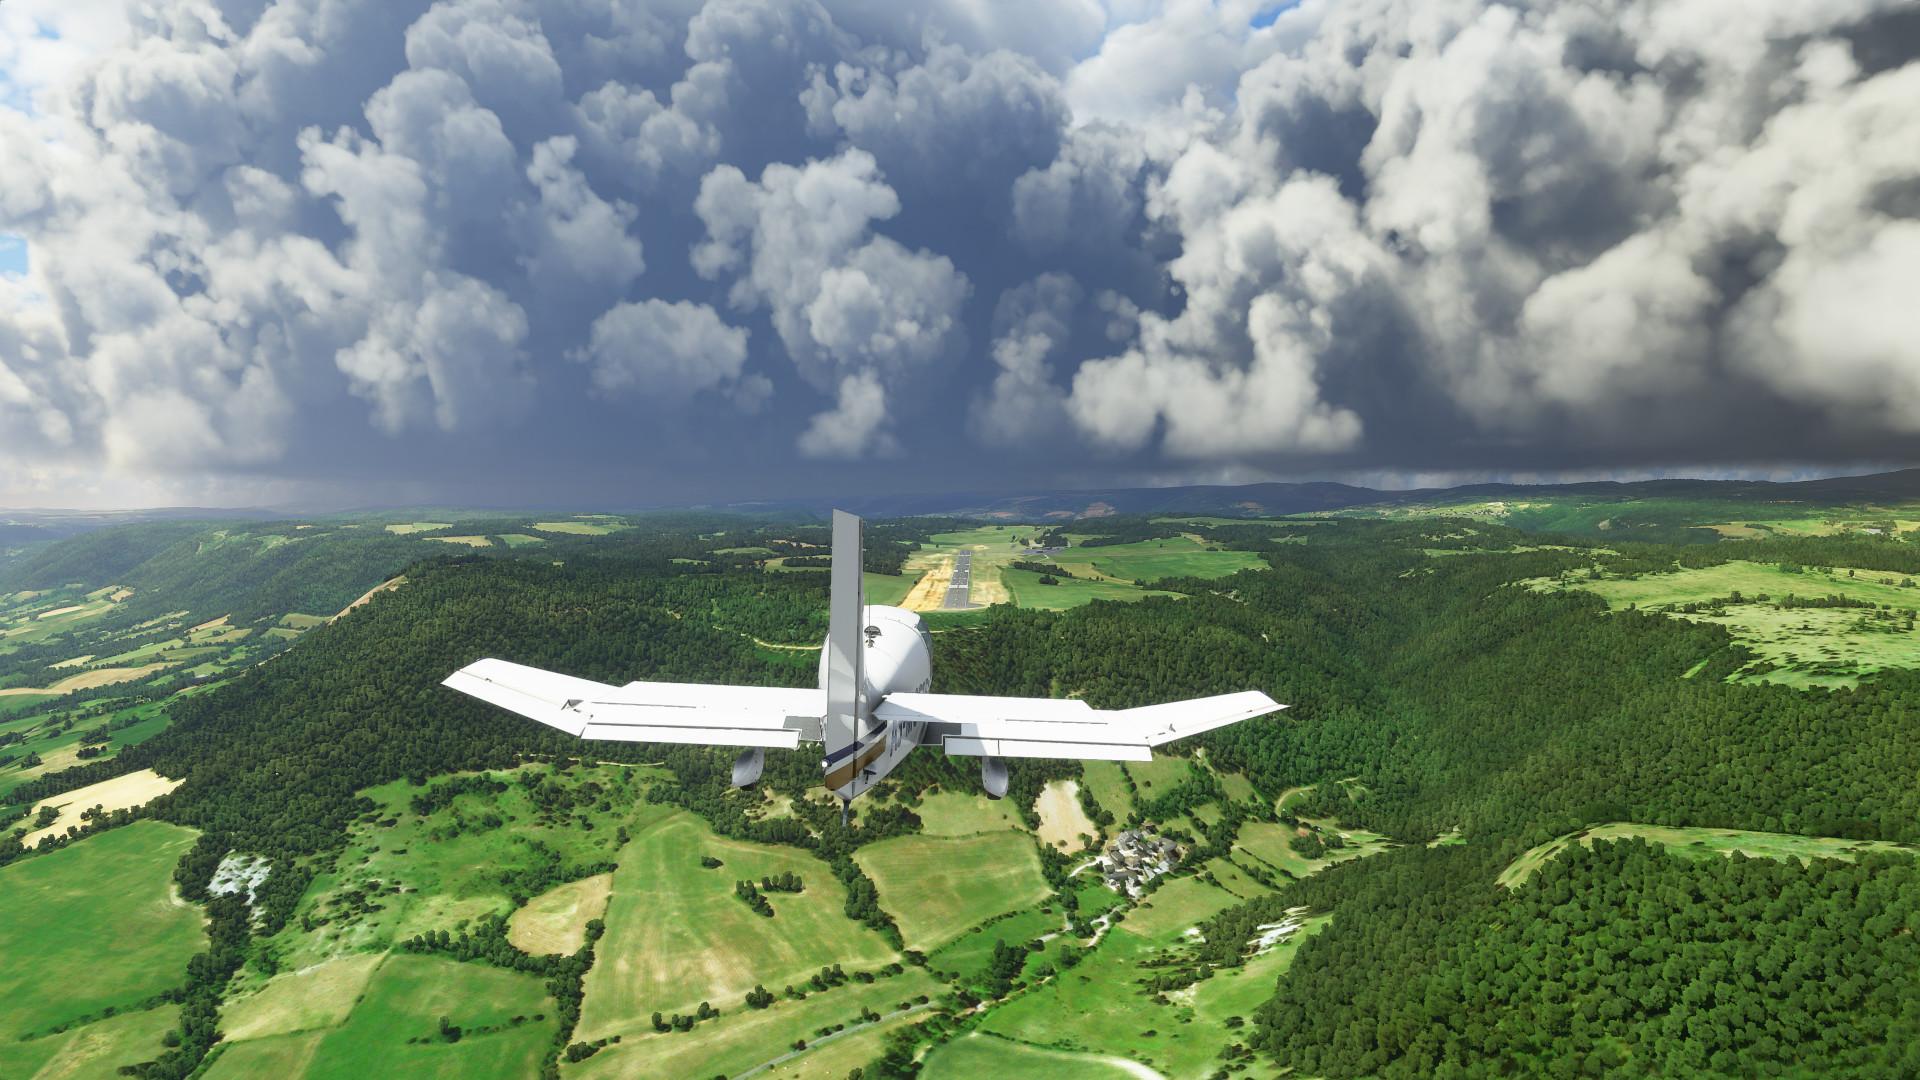 Microsoft Flight Simulator becomes top-selling game on Steam in less than a  day